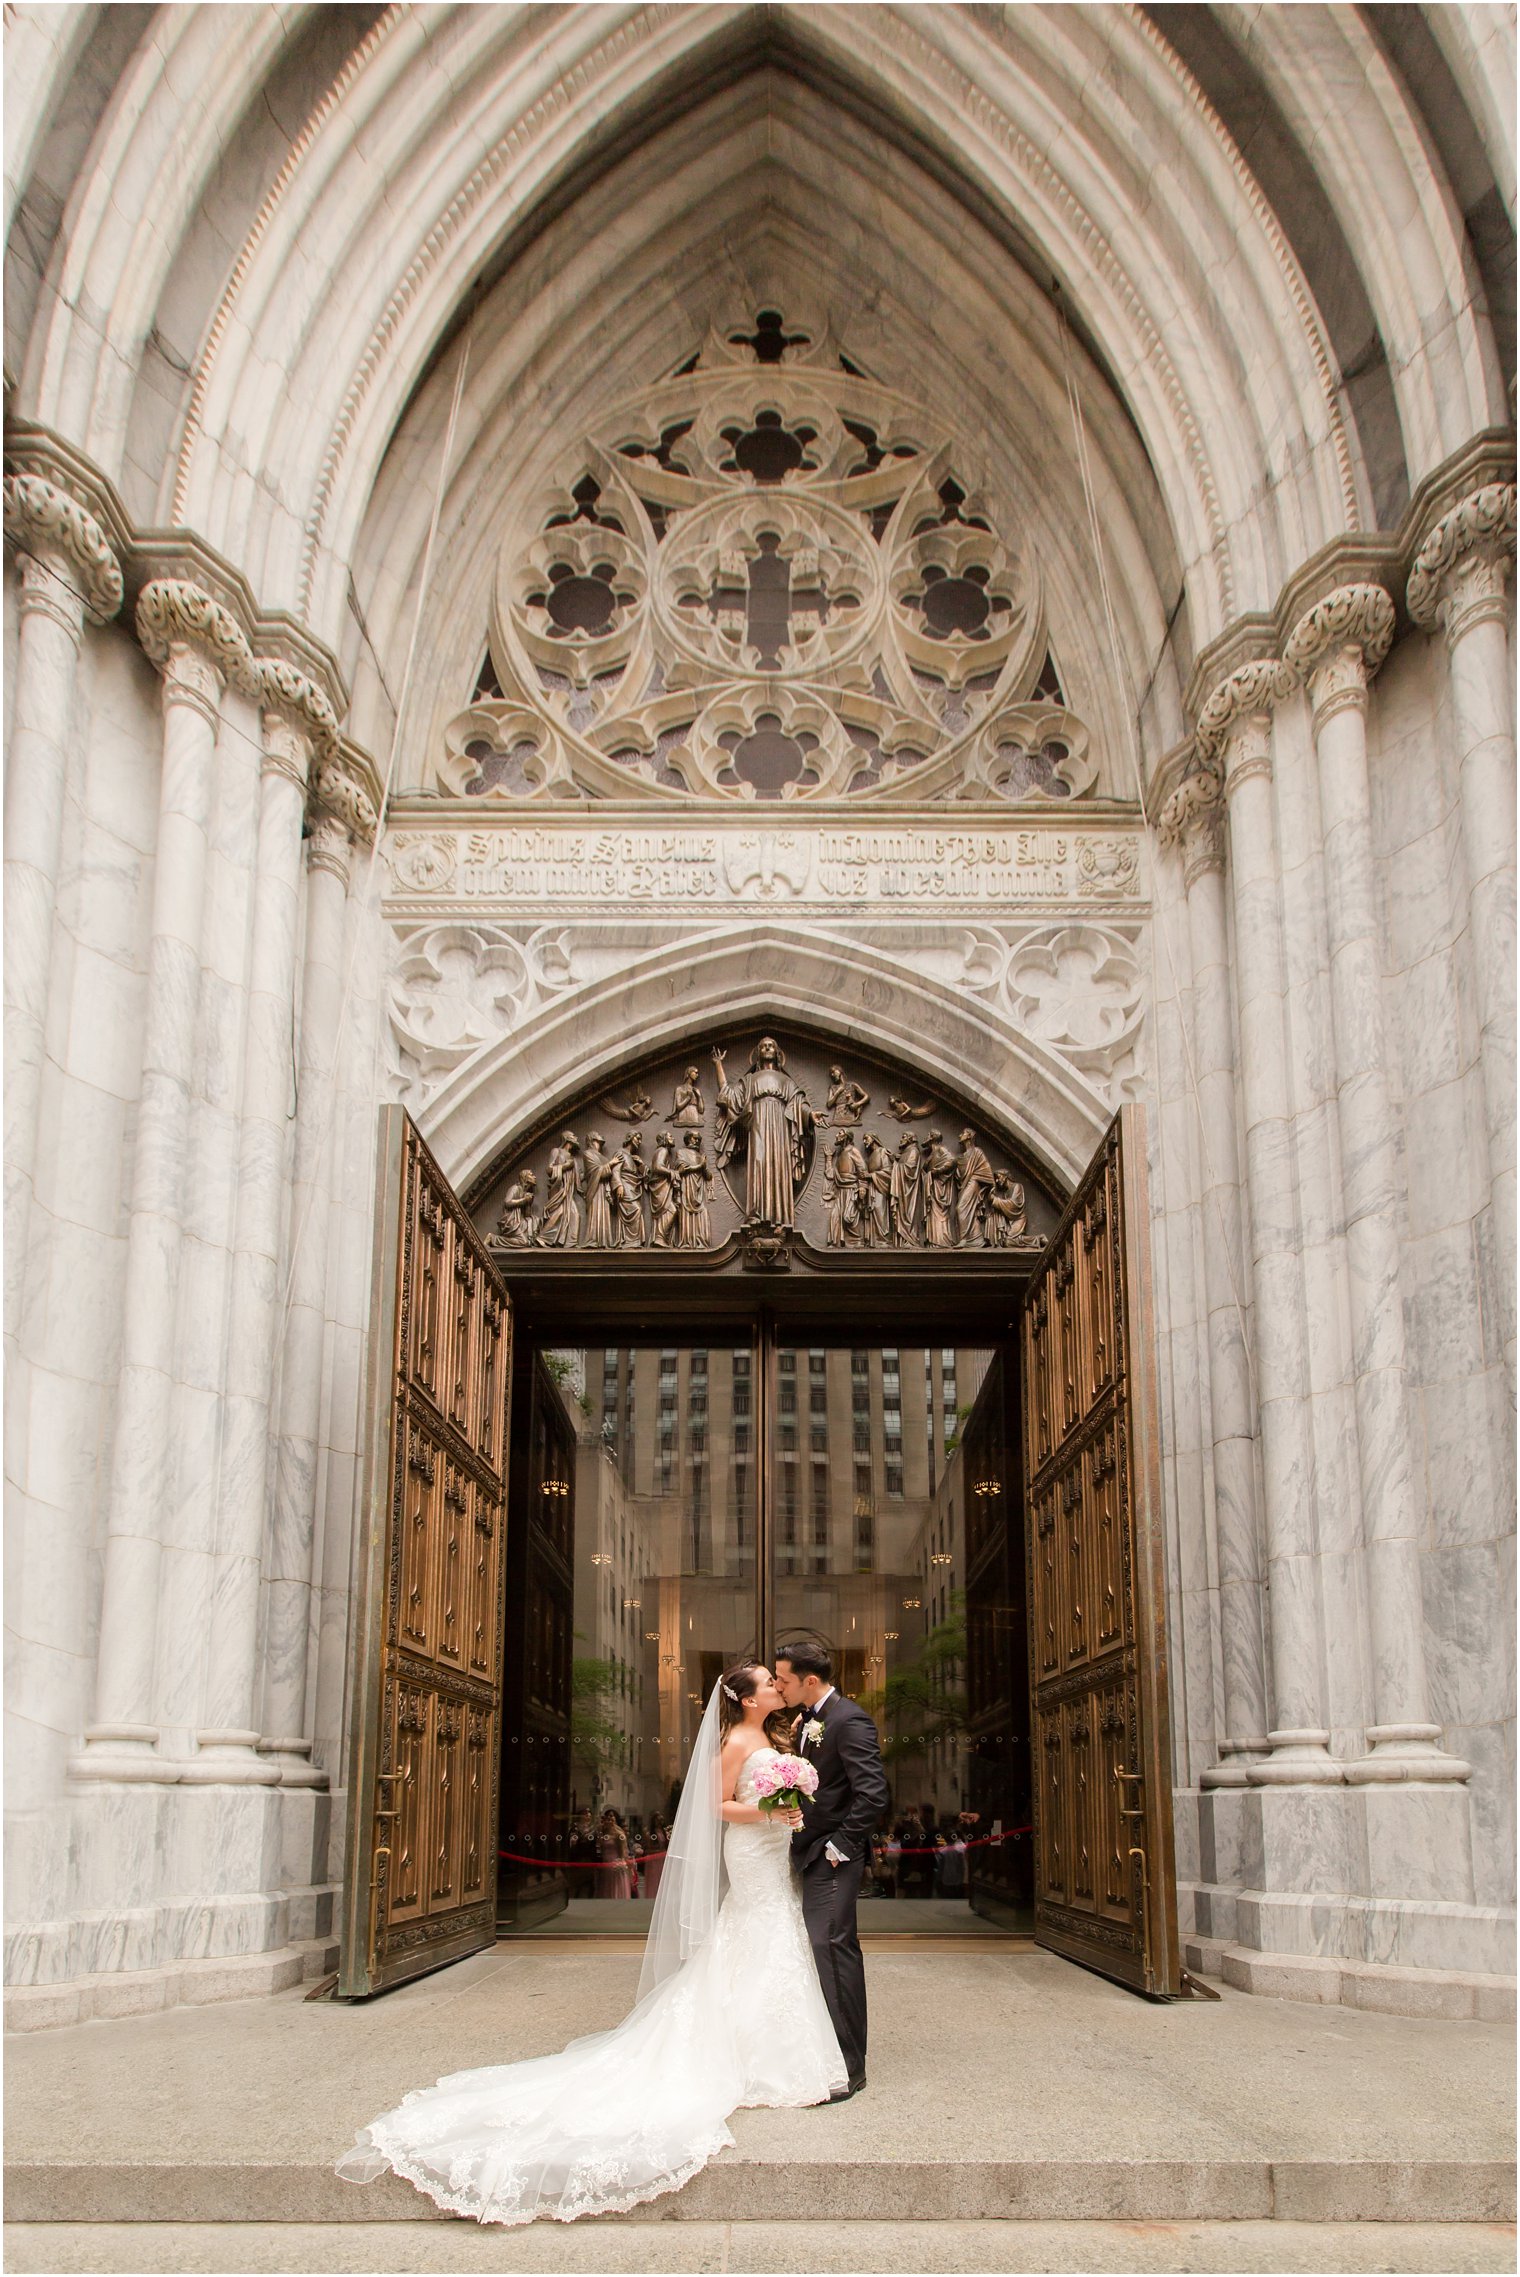 Bride and groom photo at St. Patrick's Cathedral | Photo by Idalia Photography